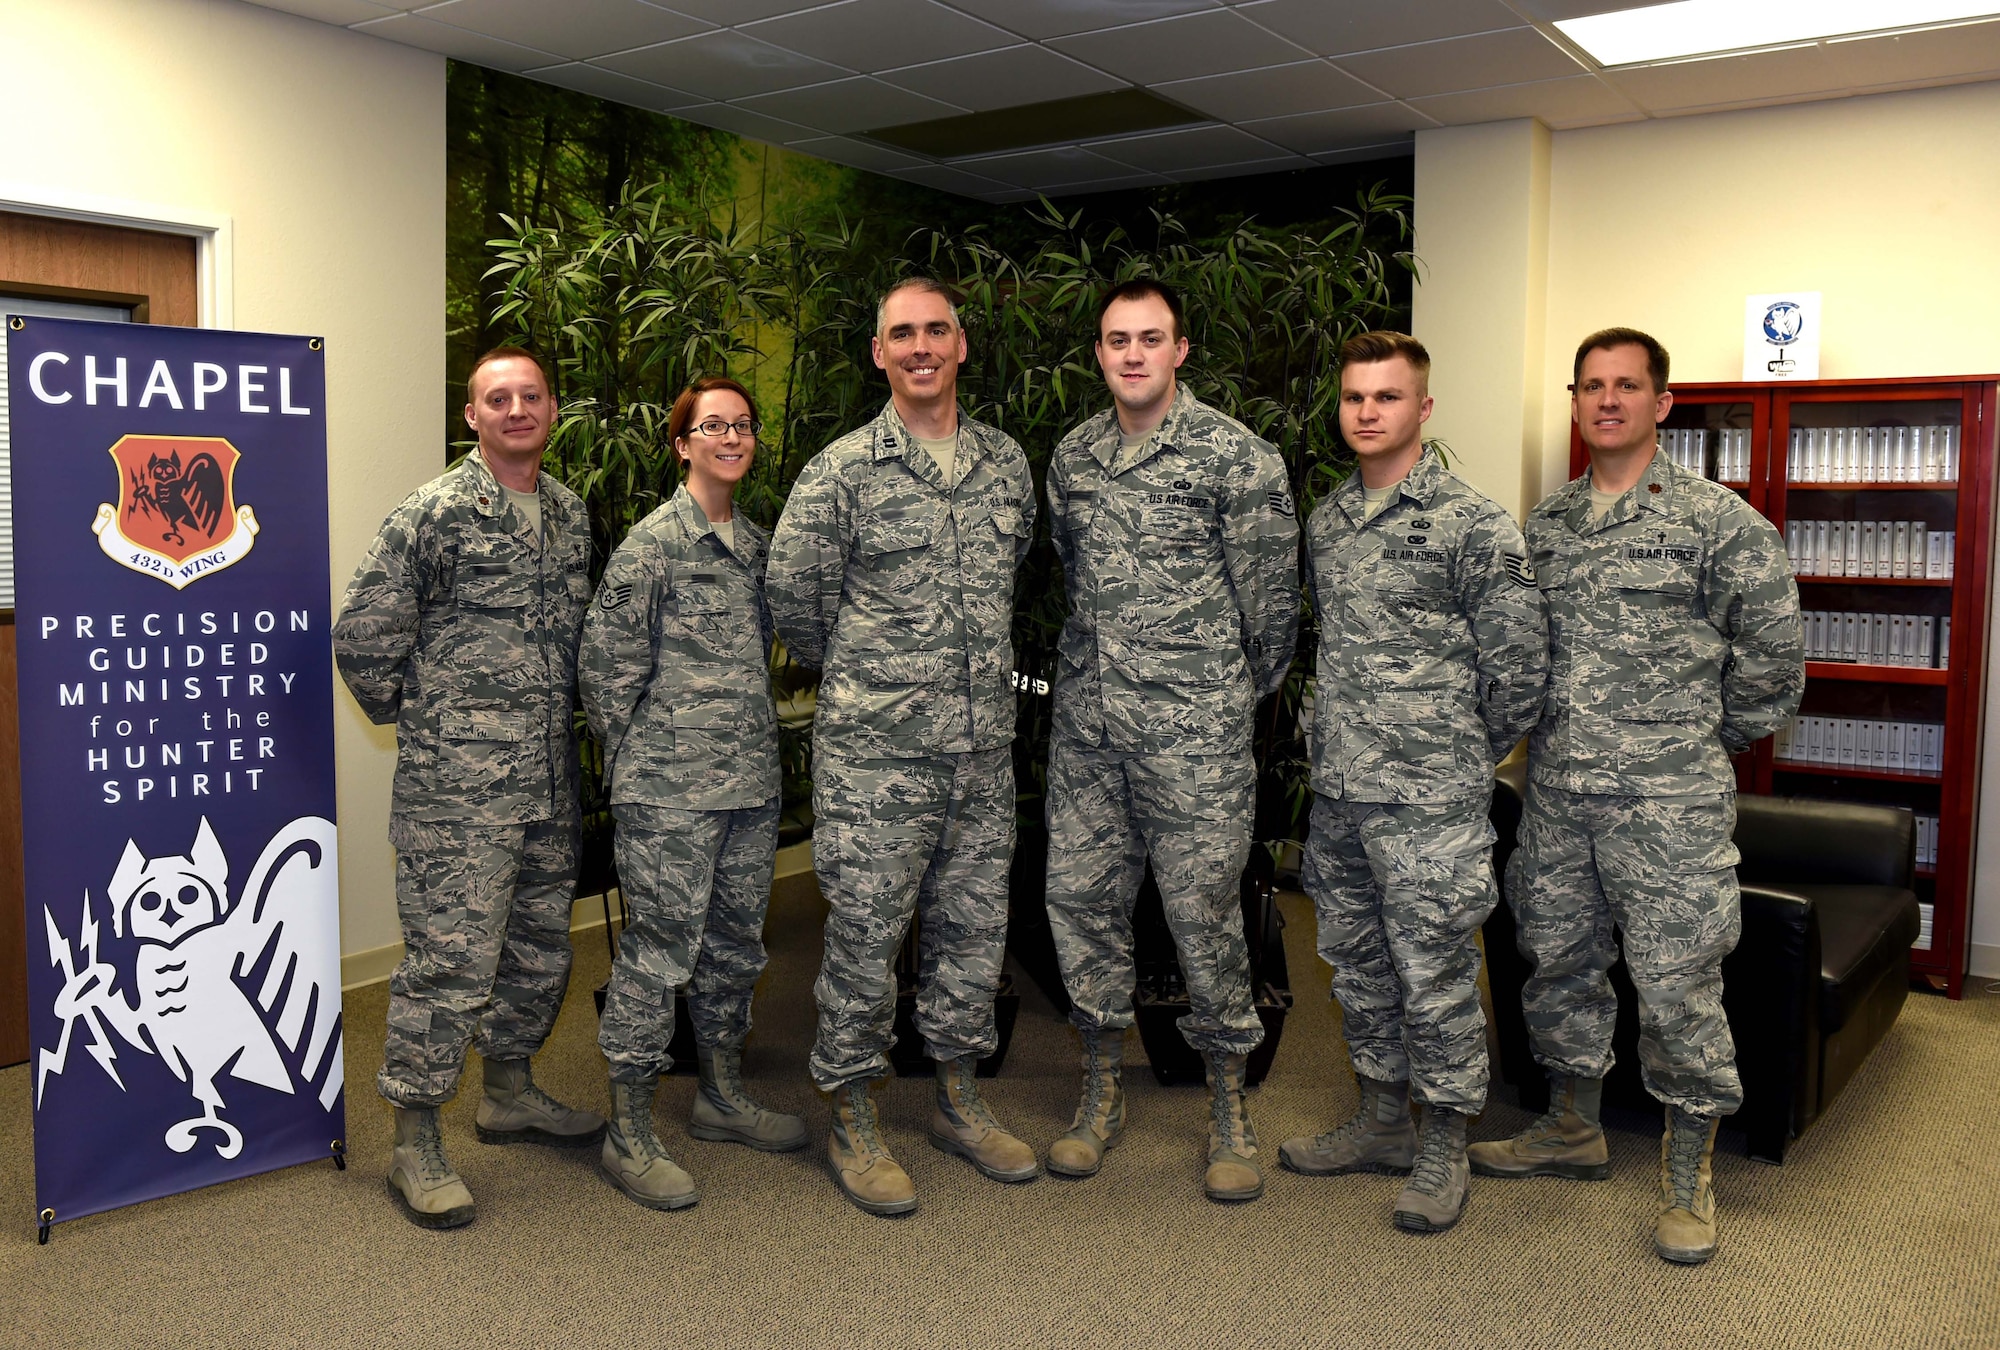 The Chaplain Corps at Creech Air Force Base, Nevada, poses for a photo Jan. 20, 2016, at the Creech Airman Ministry Center.  The team is dedicated to taking care of the Hunter family by bringing precision guided ministry to the mission. Through unit visitation and meeting with Airmen for spiritual and religious counseling, Chaplains contribute to the success of the mission. (U.S. Air Force photo by Airman 1st Class Kristan Campbell/Released)